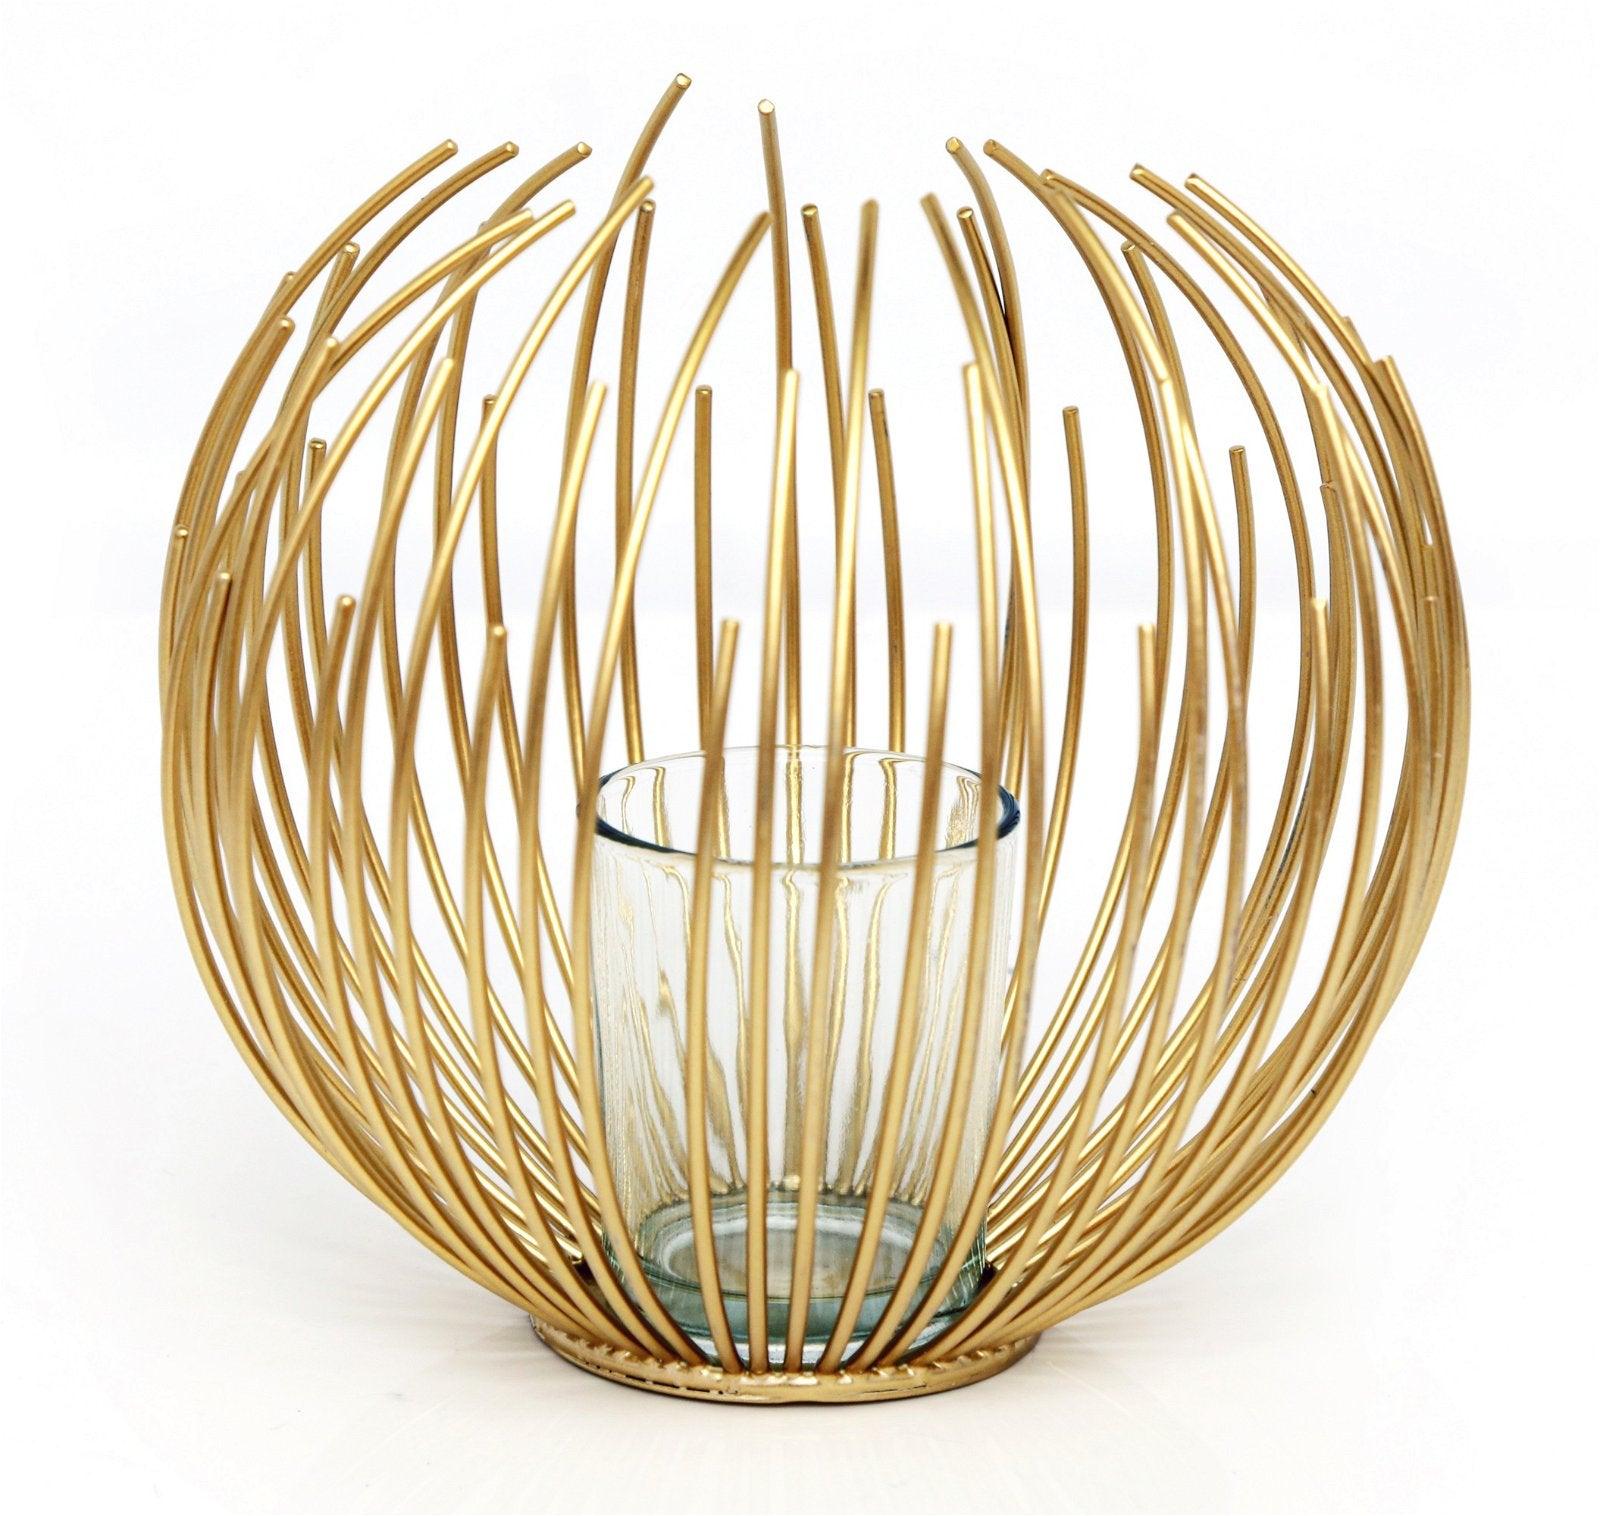 Gold Wire Candle Holder 16cm - £22.99 - Candle Holders & Plates 